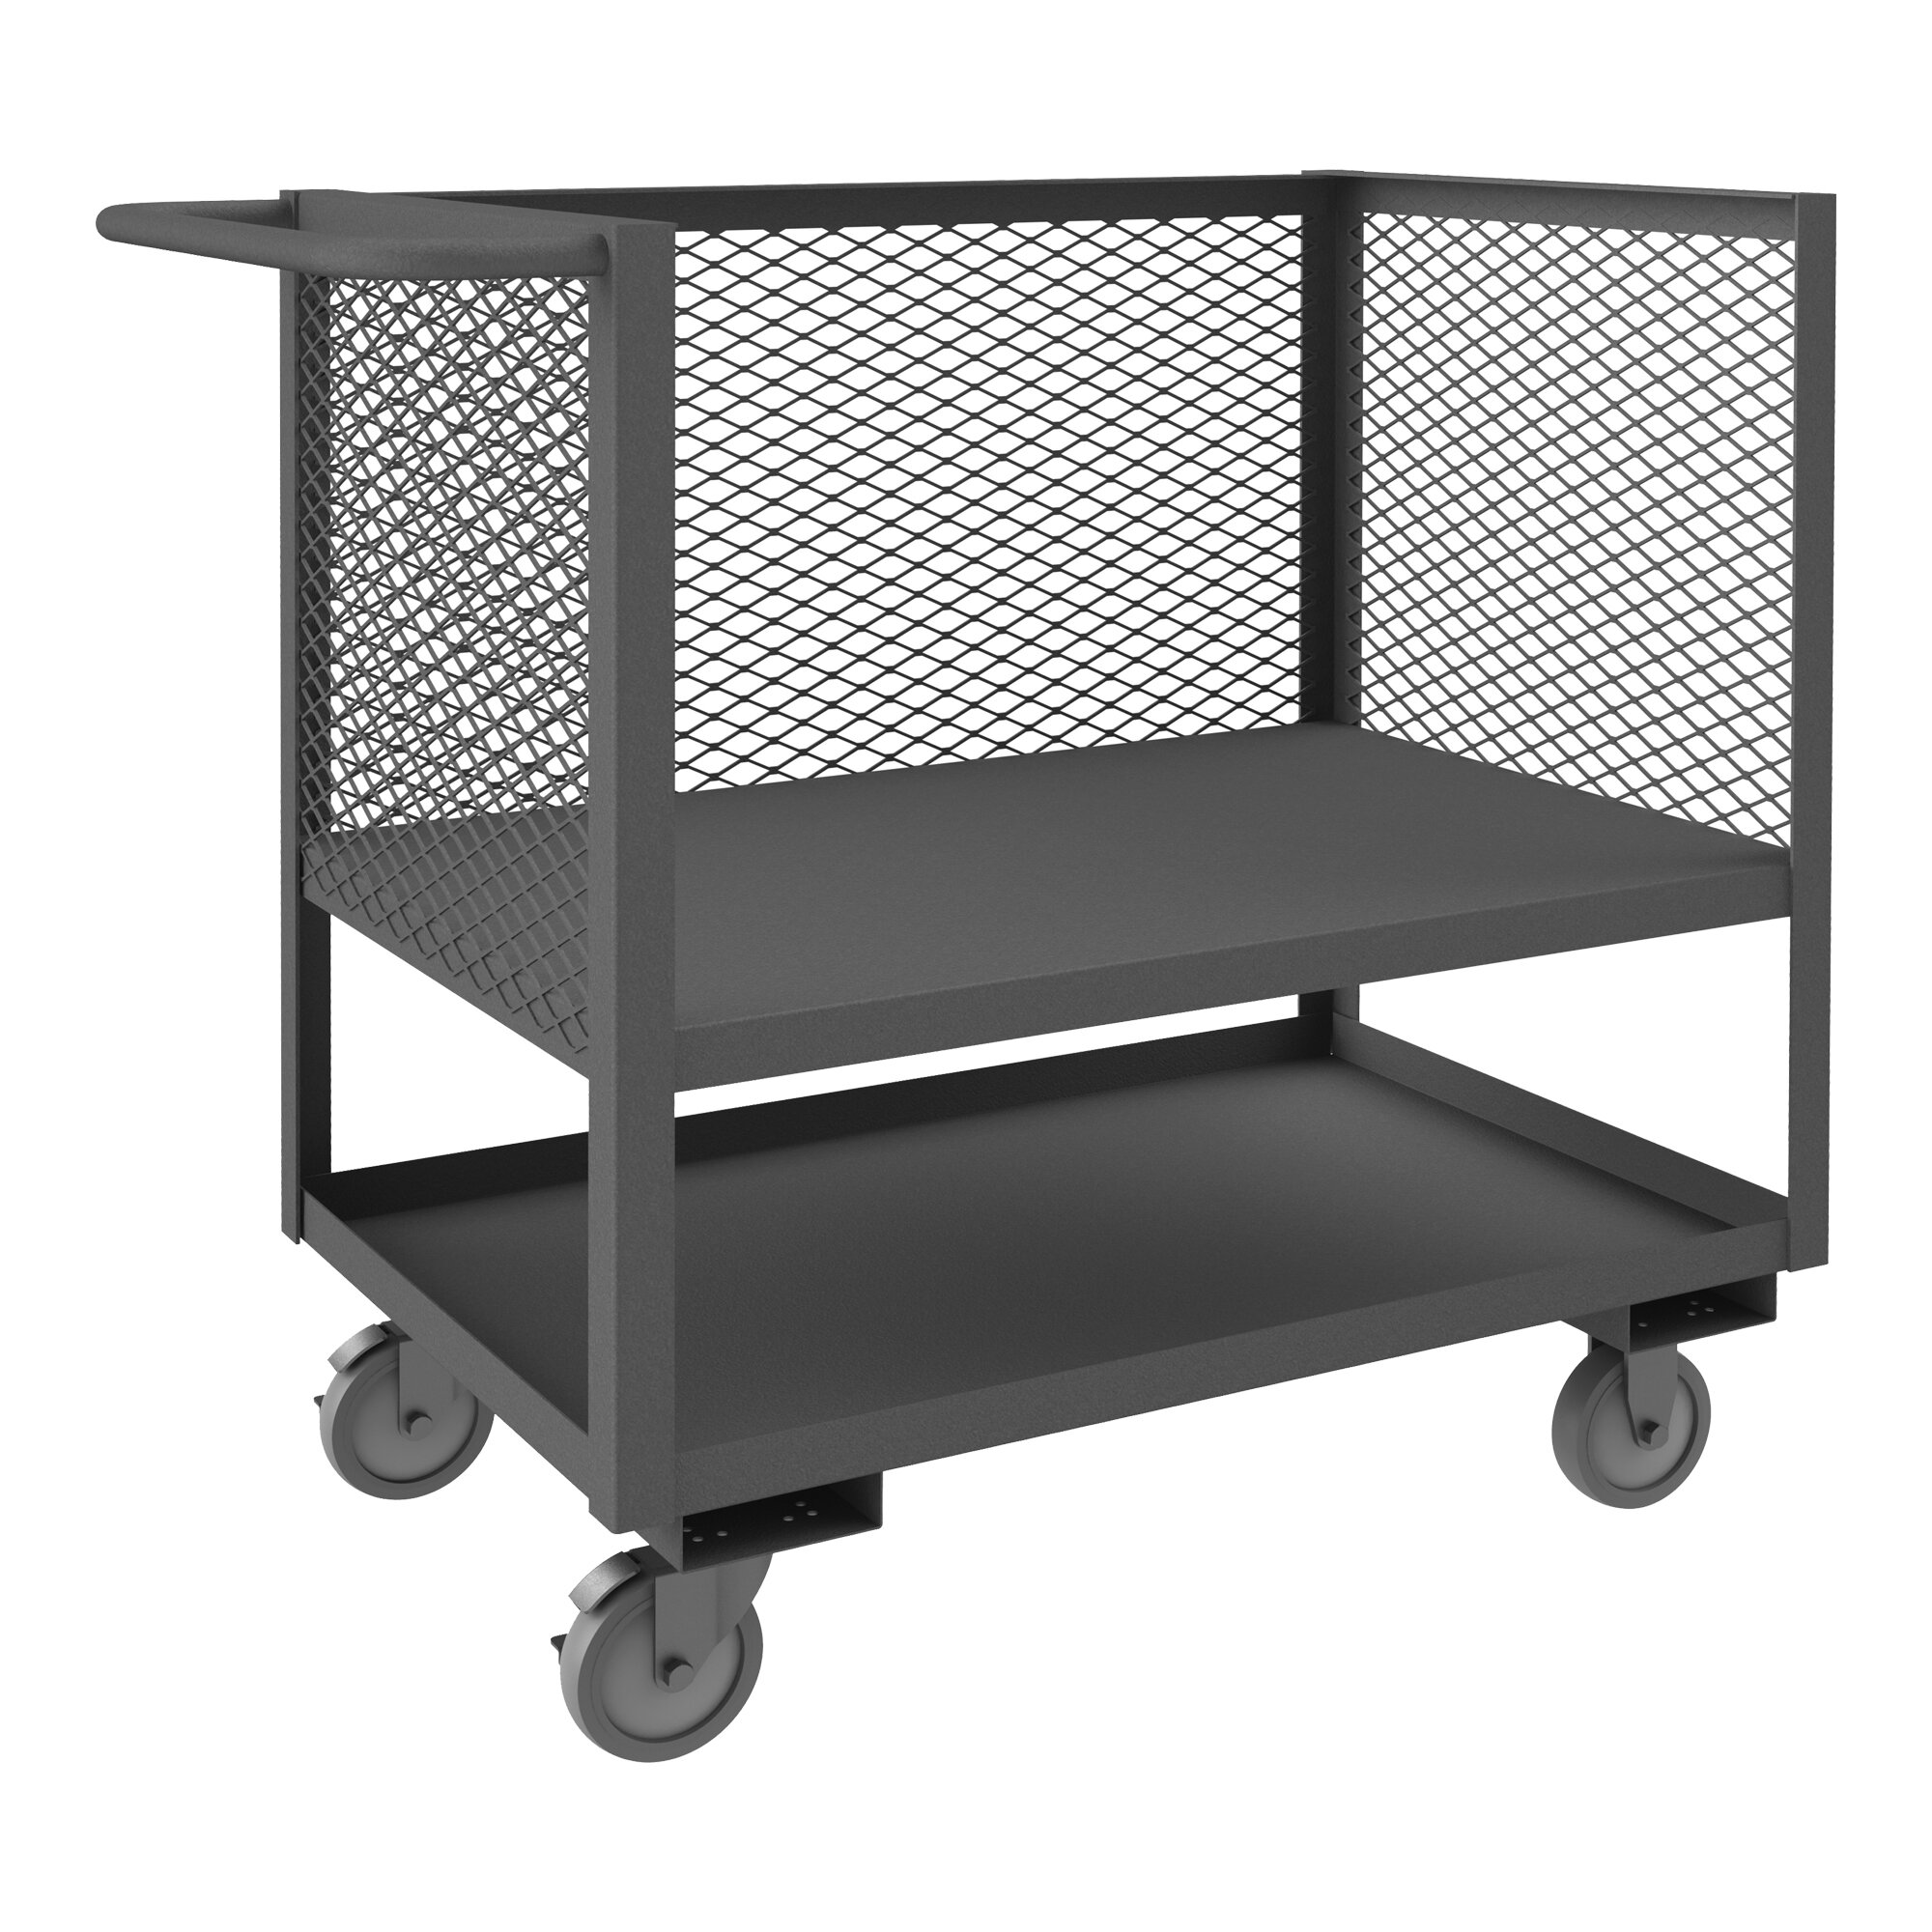 3-Tier Rolling Storage Utility Cart, Heavy Duty Craft Cart with